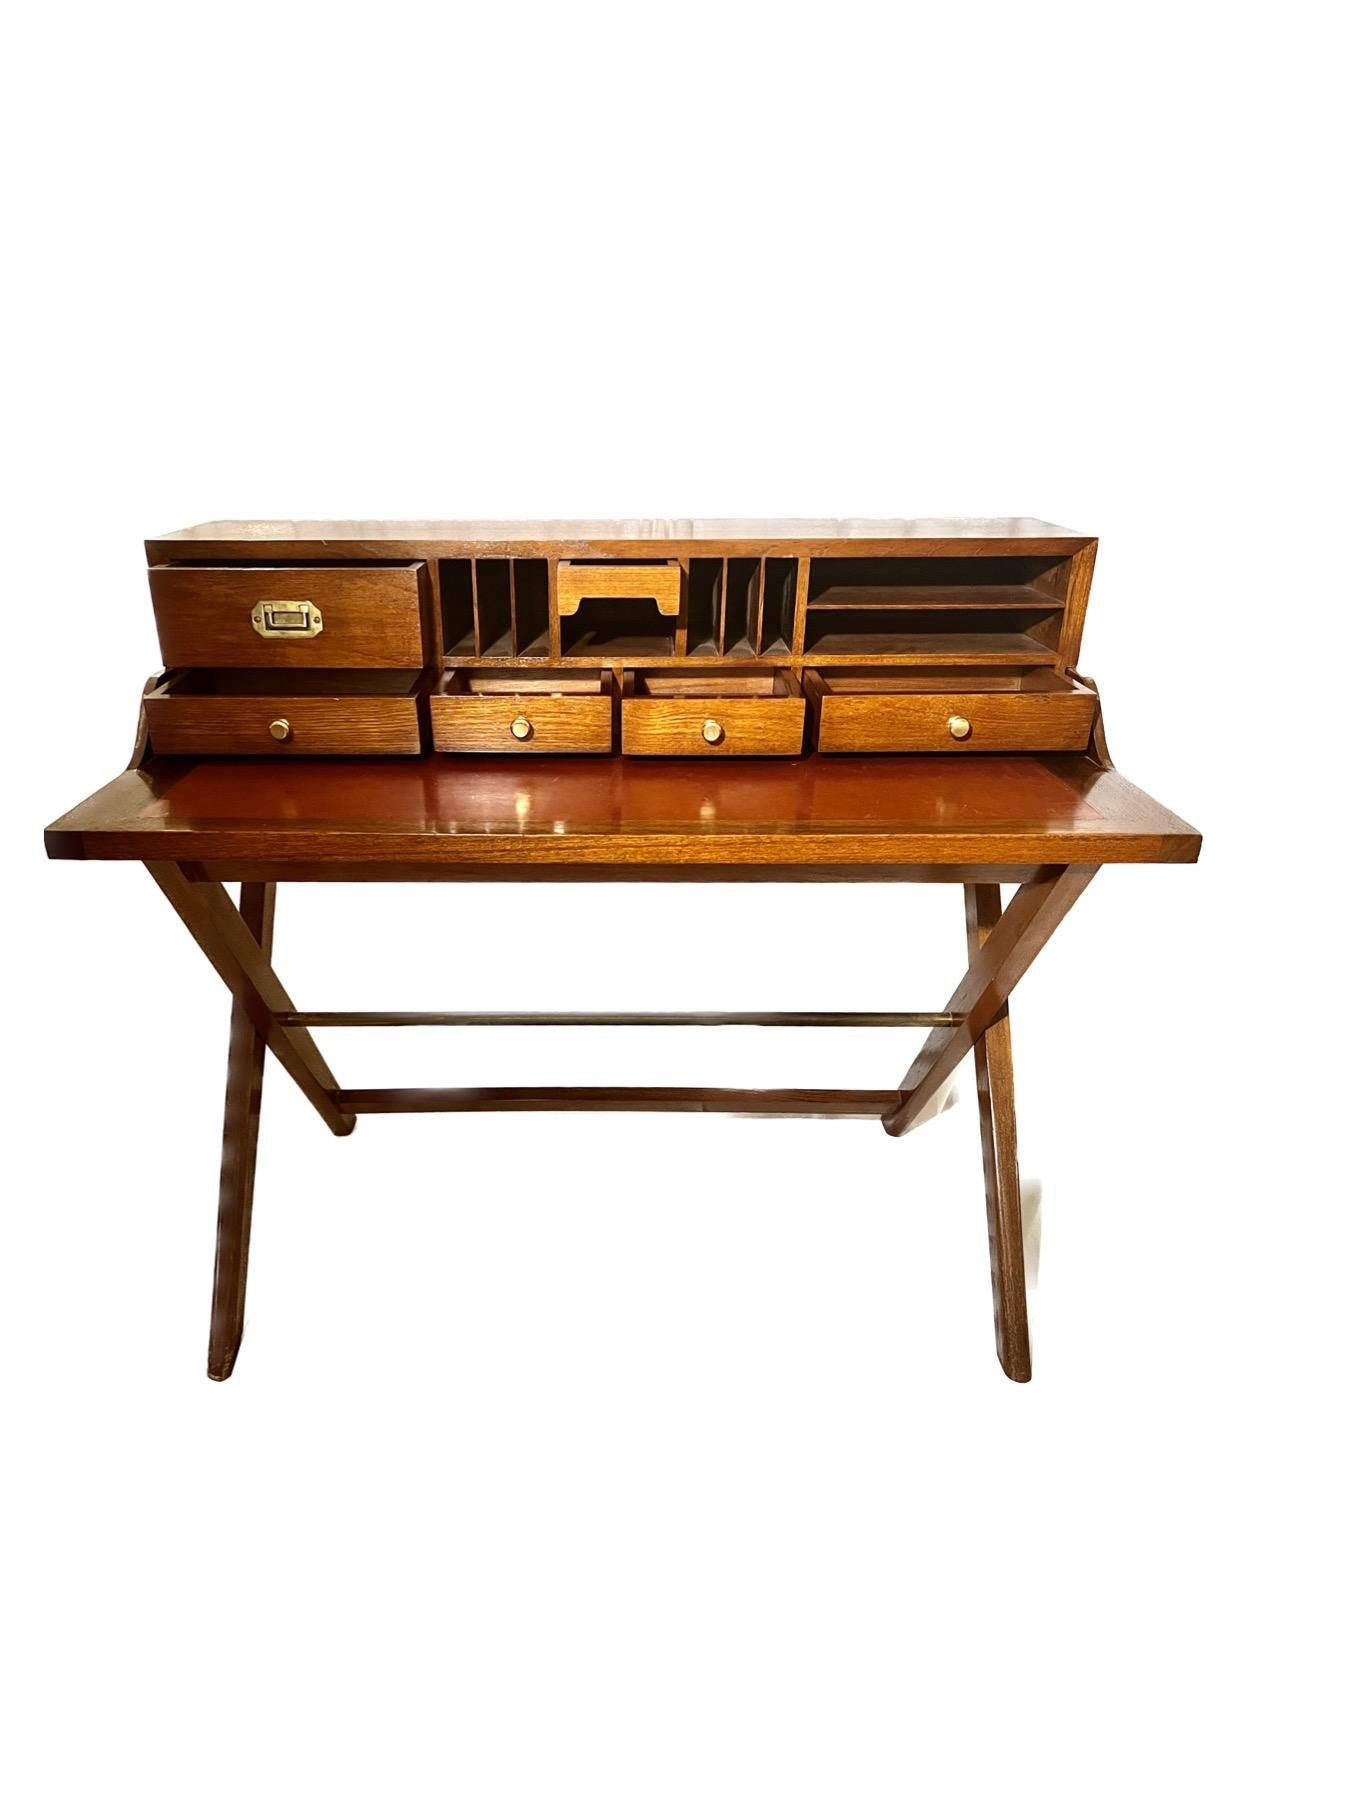 English Campaign Style Desk  with fitted drawers
